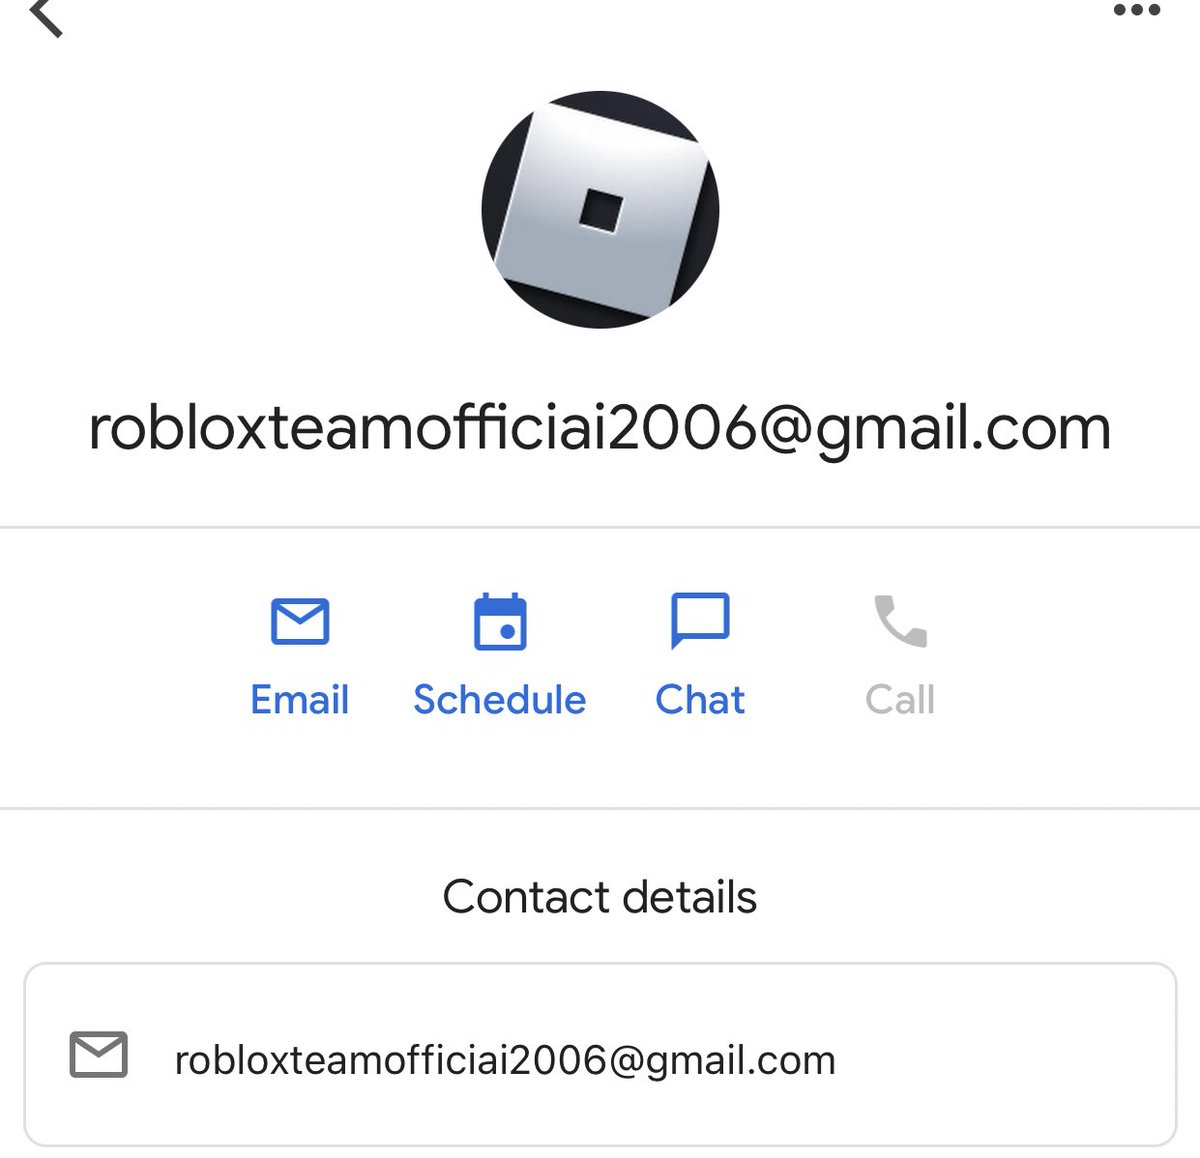 Krystin On Twitter Never Fall For These Email Scams Guys 1 Never Give Your Password And Roblox Will Never Ask U For It 2 Roblox Doesn T Contact You Using A Gmail - roblox gmail email